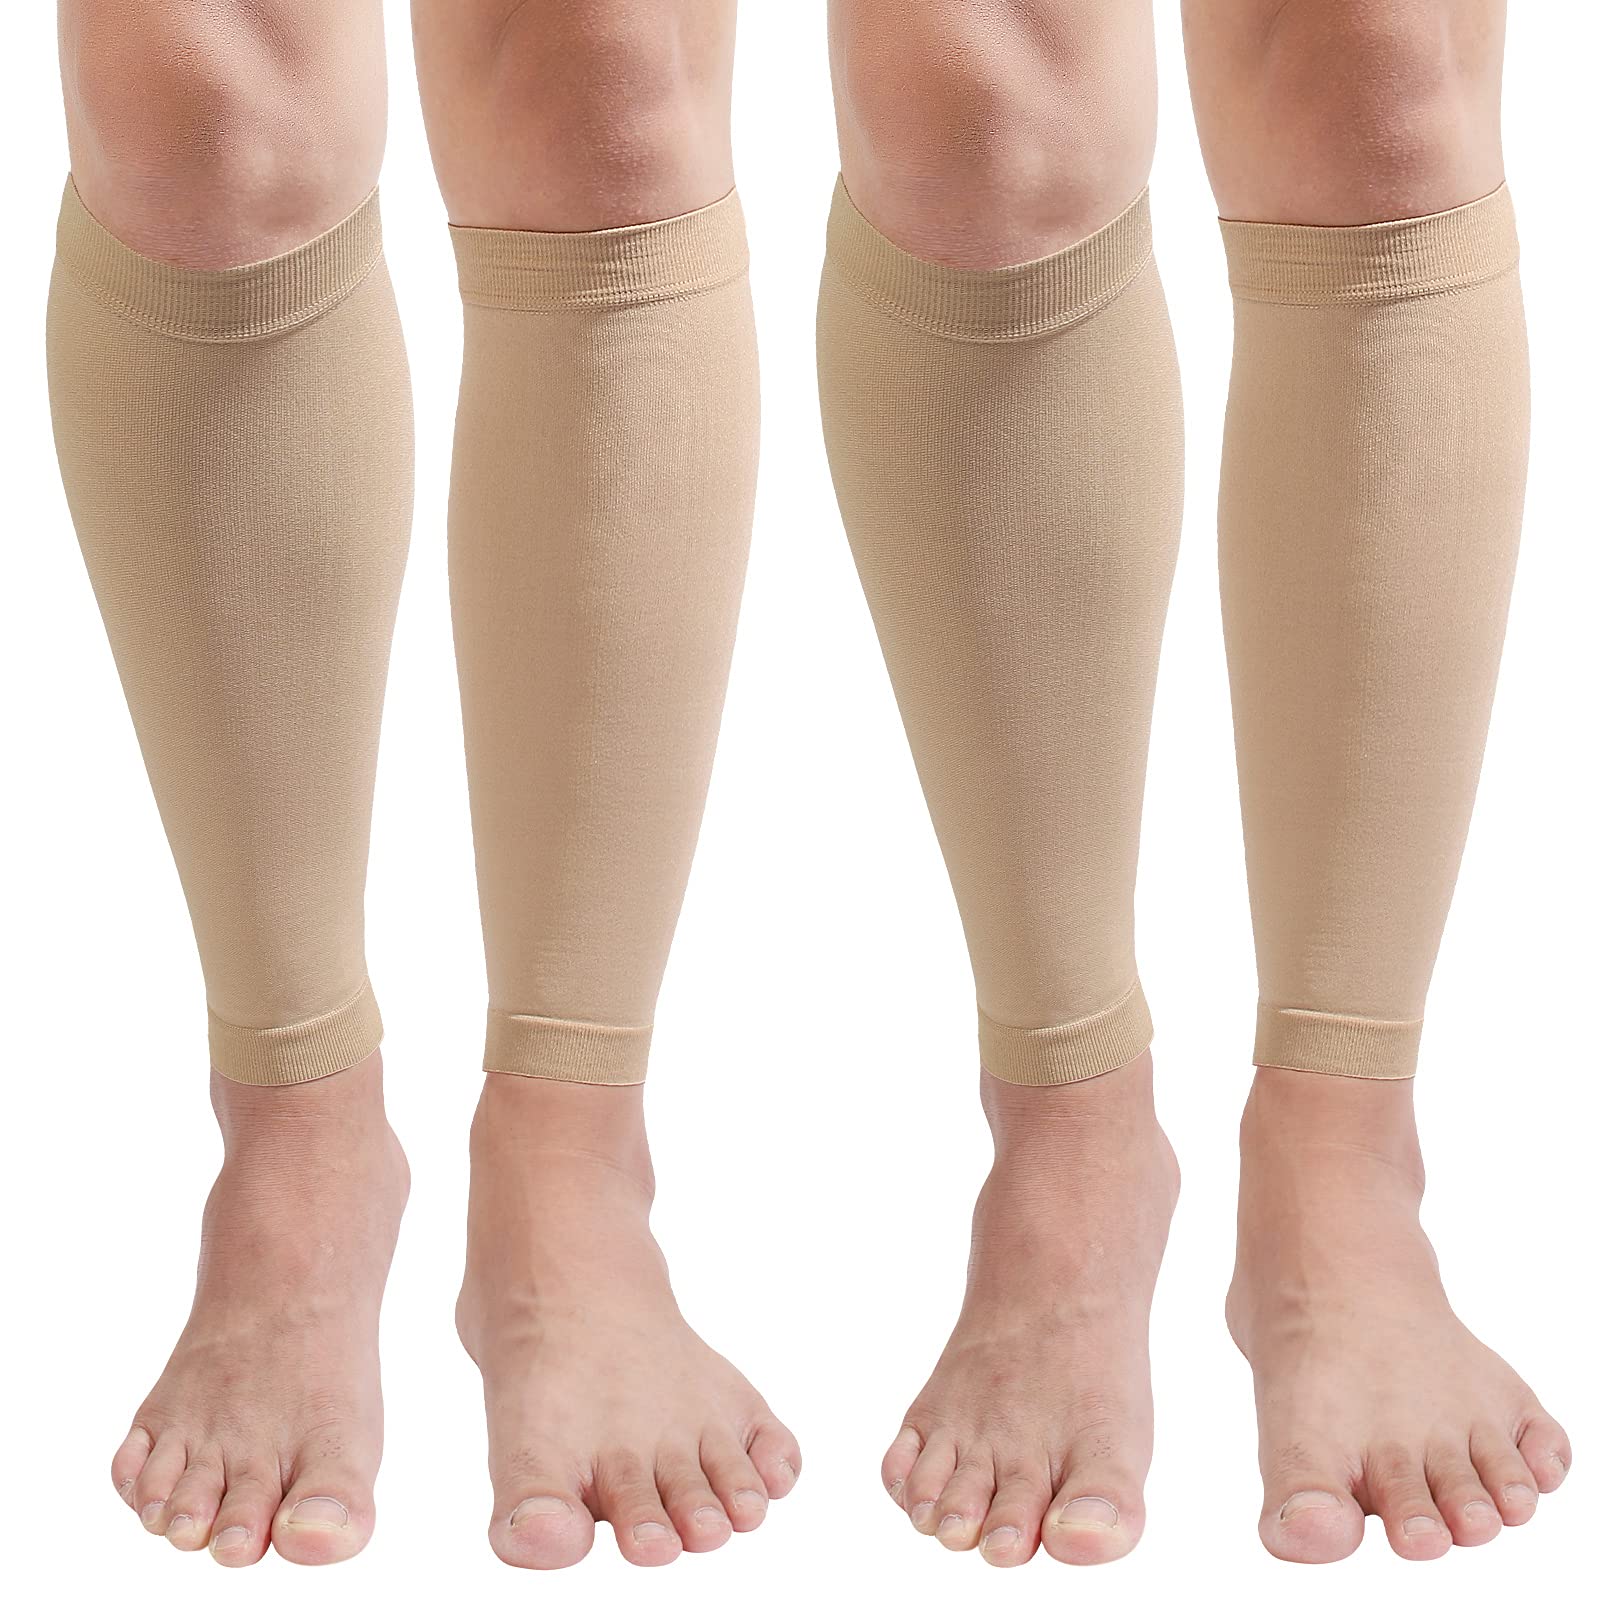 MGANG Calf Compression Sleeve, (2 Pairs) 20-30mmHg Leg Compression Socks,  Unisex for Pain Relief, Swelling